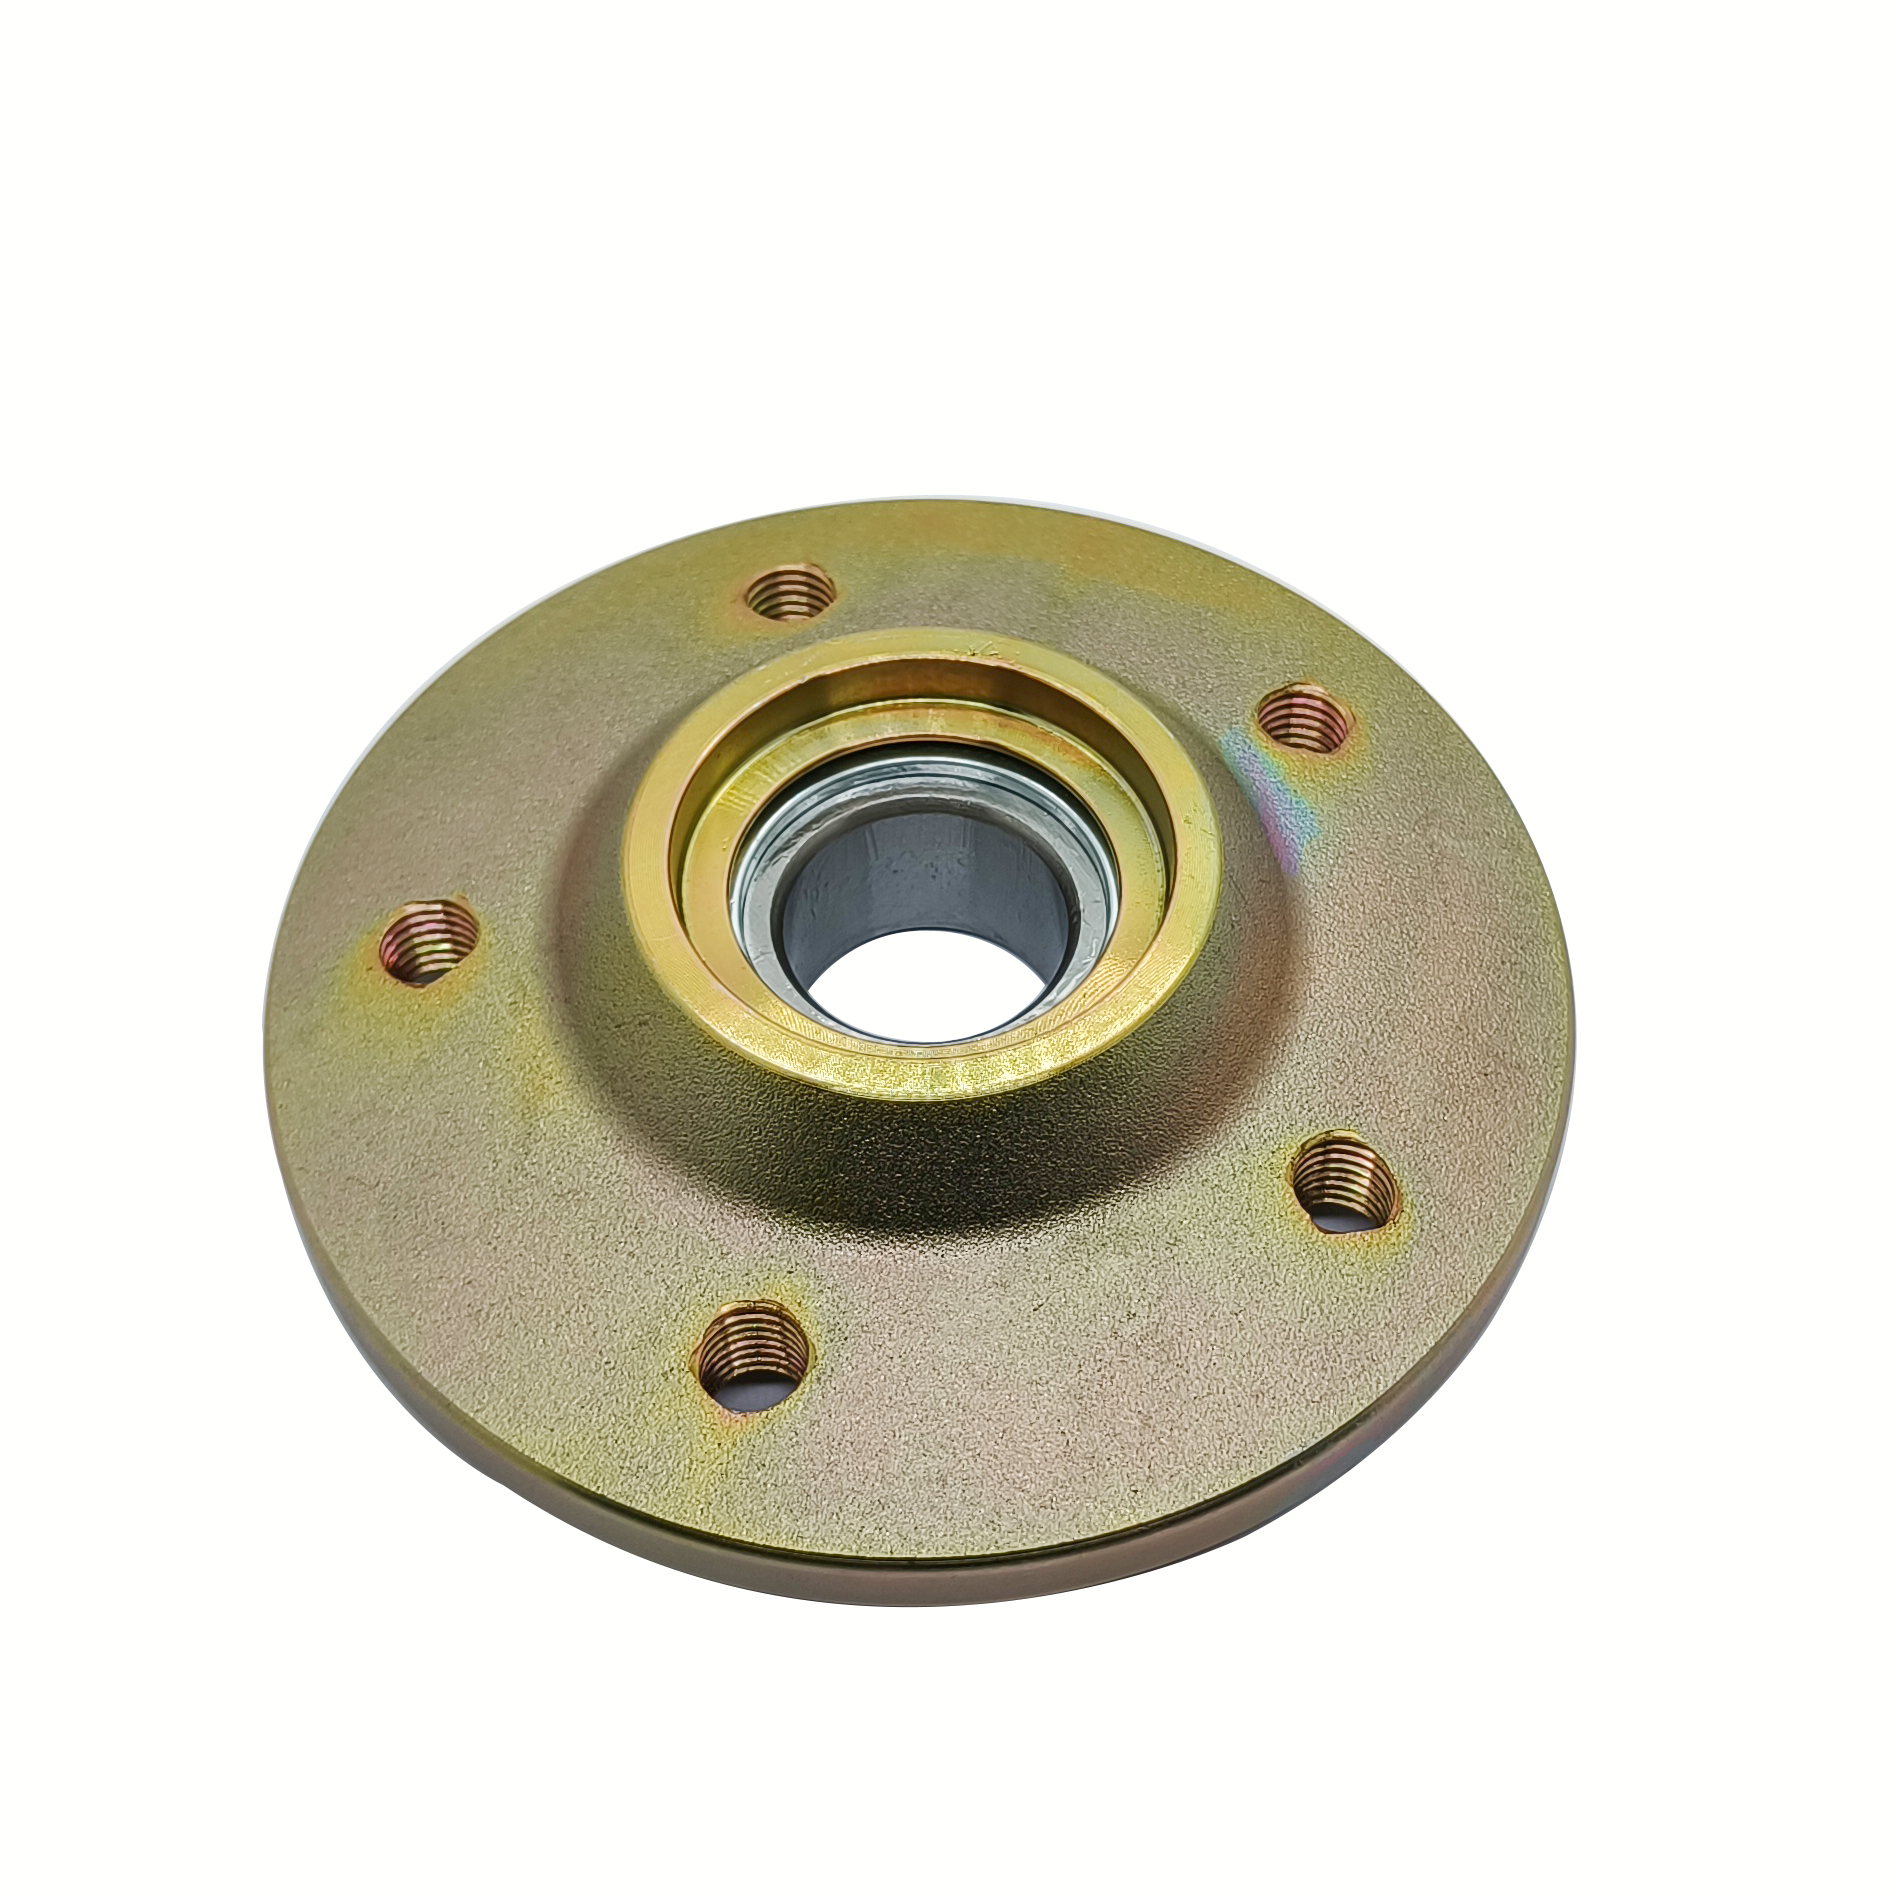 Hot sales factory supplier PL-140 Tractor Agricultural hub bearing for Horsch Disc Harrow Part